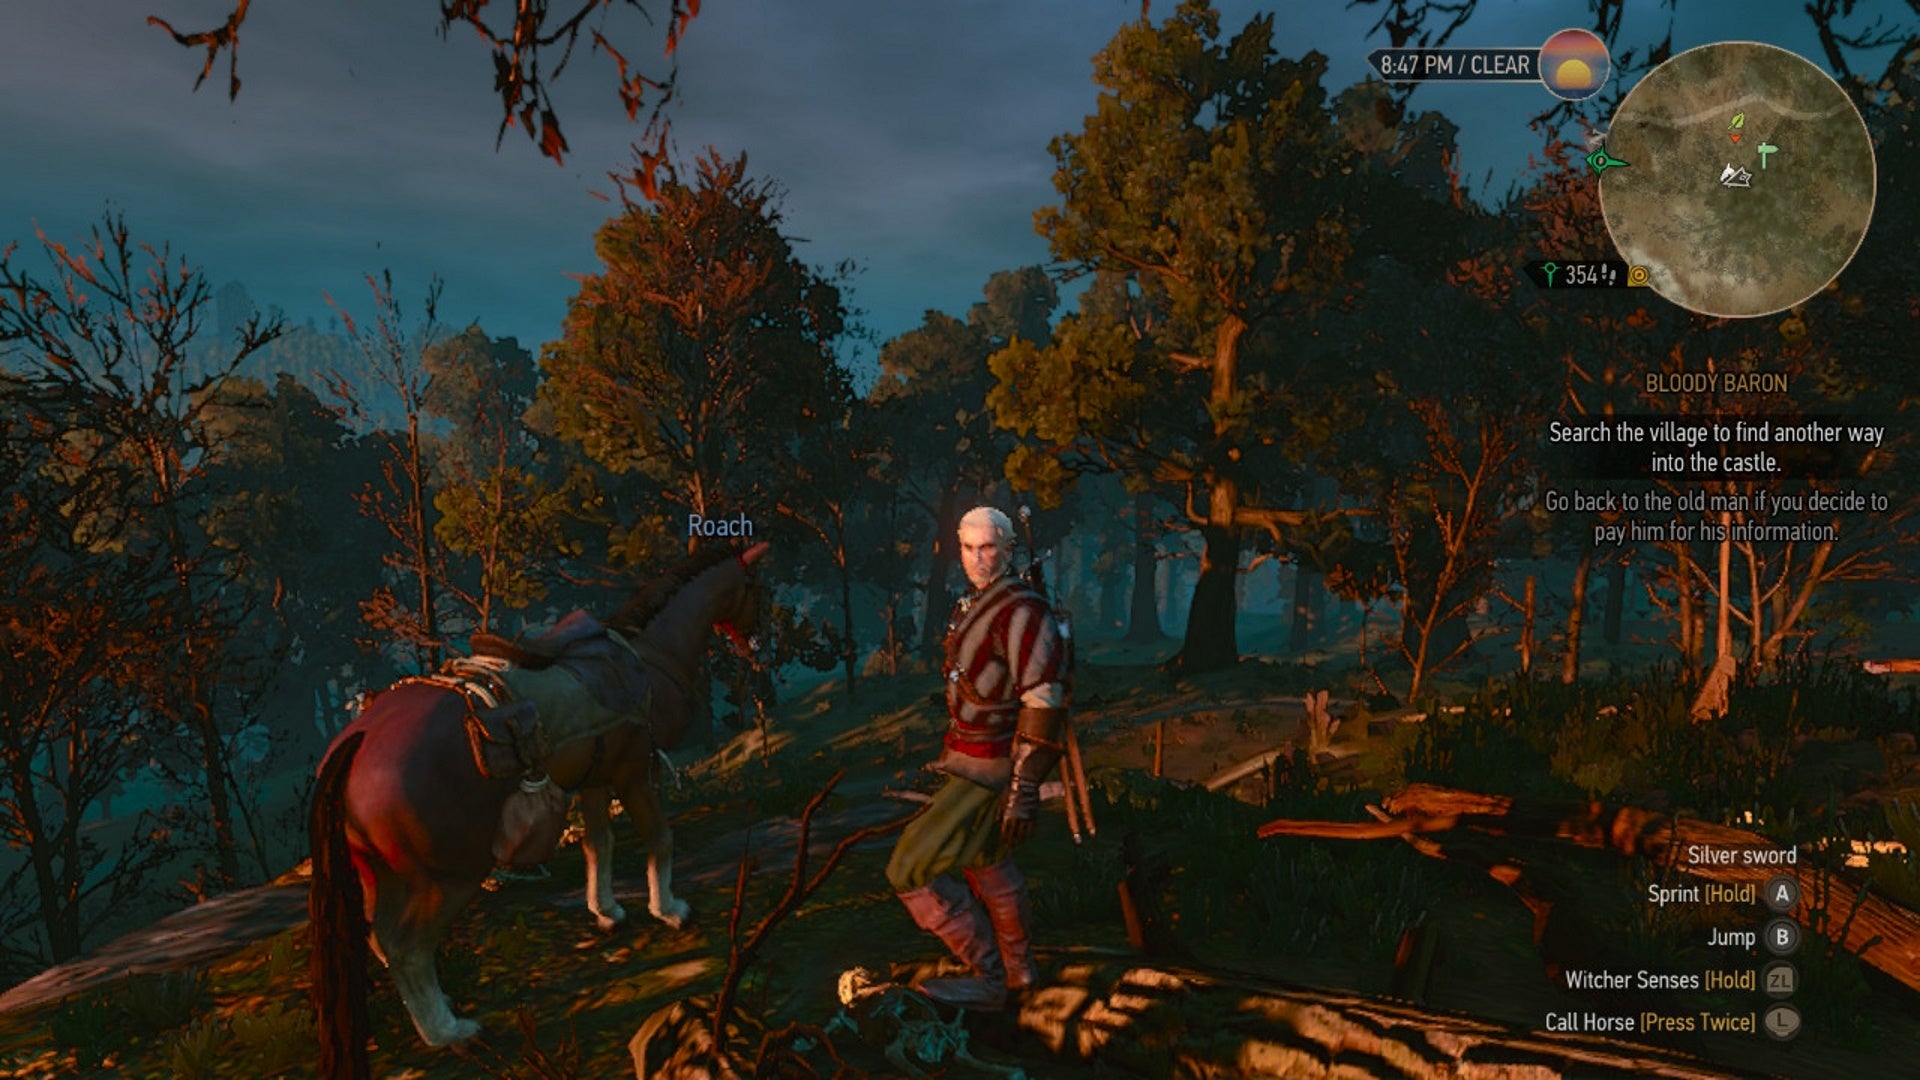 The Witcher 3 saddlebags: A man wearing red and white striped clothing is standing next to a horse. Both are in the middle of a swampy area surrounded by trees bathed in the red glow of sunset